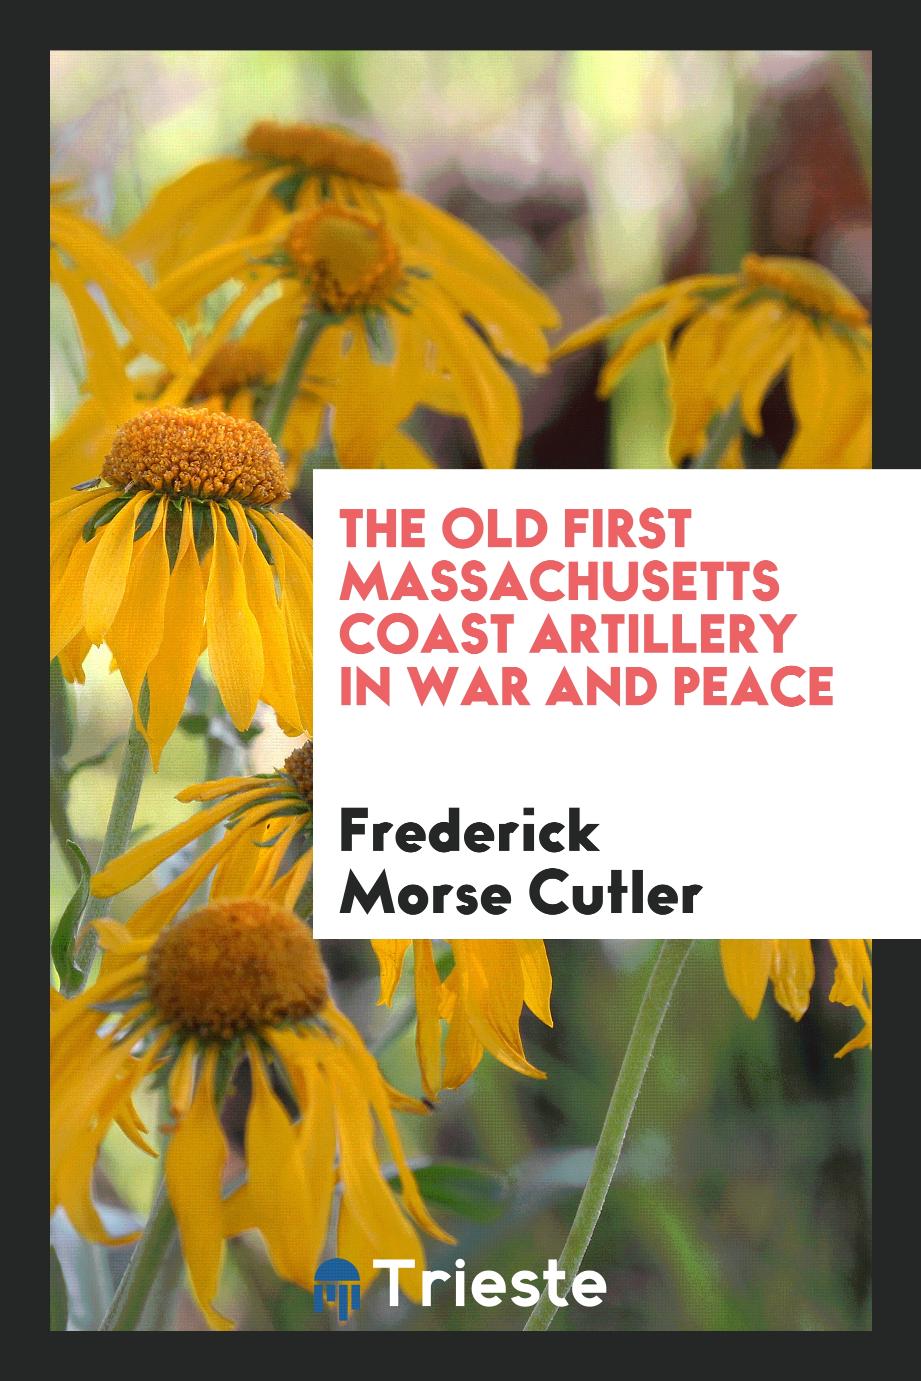 The old First Massachusetts coast artillery in war and peace